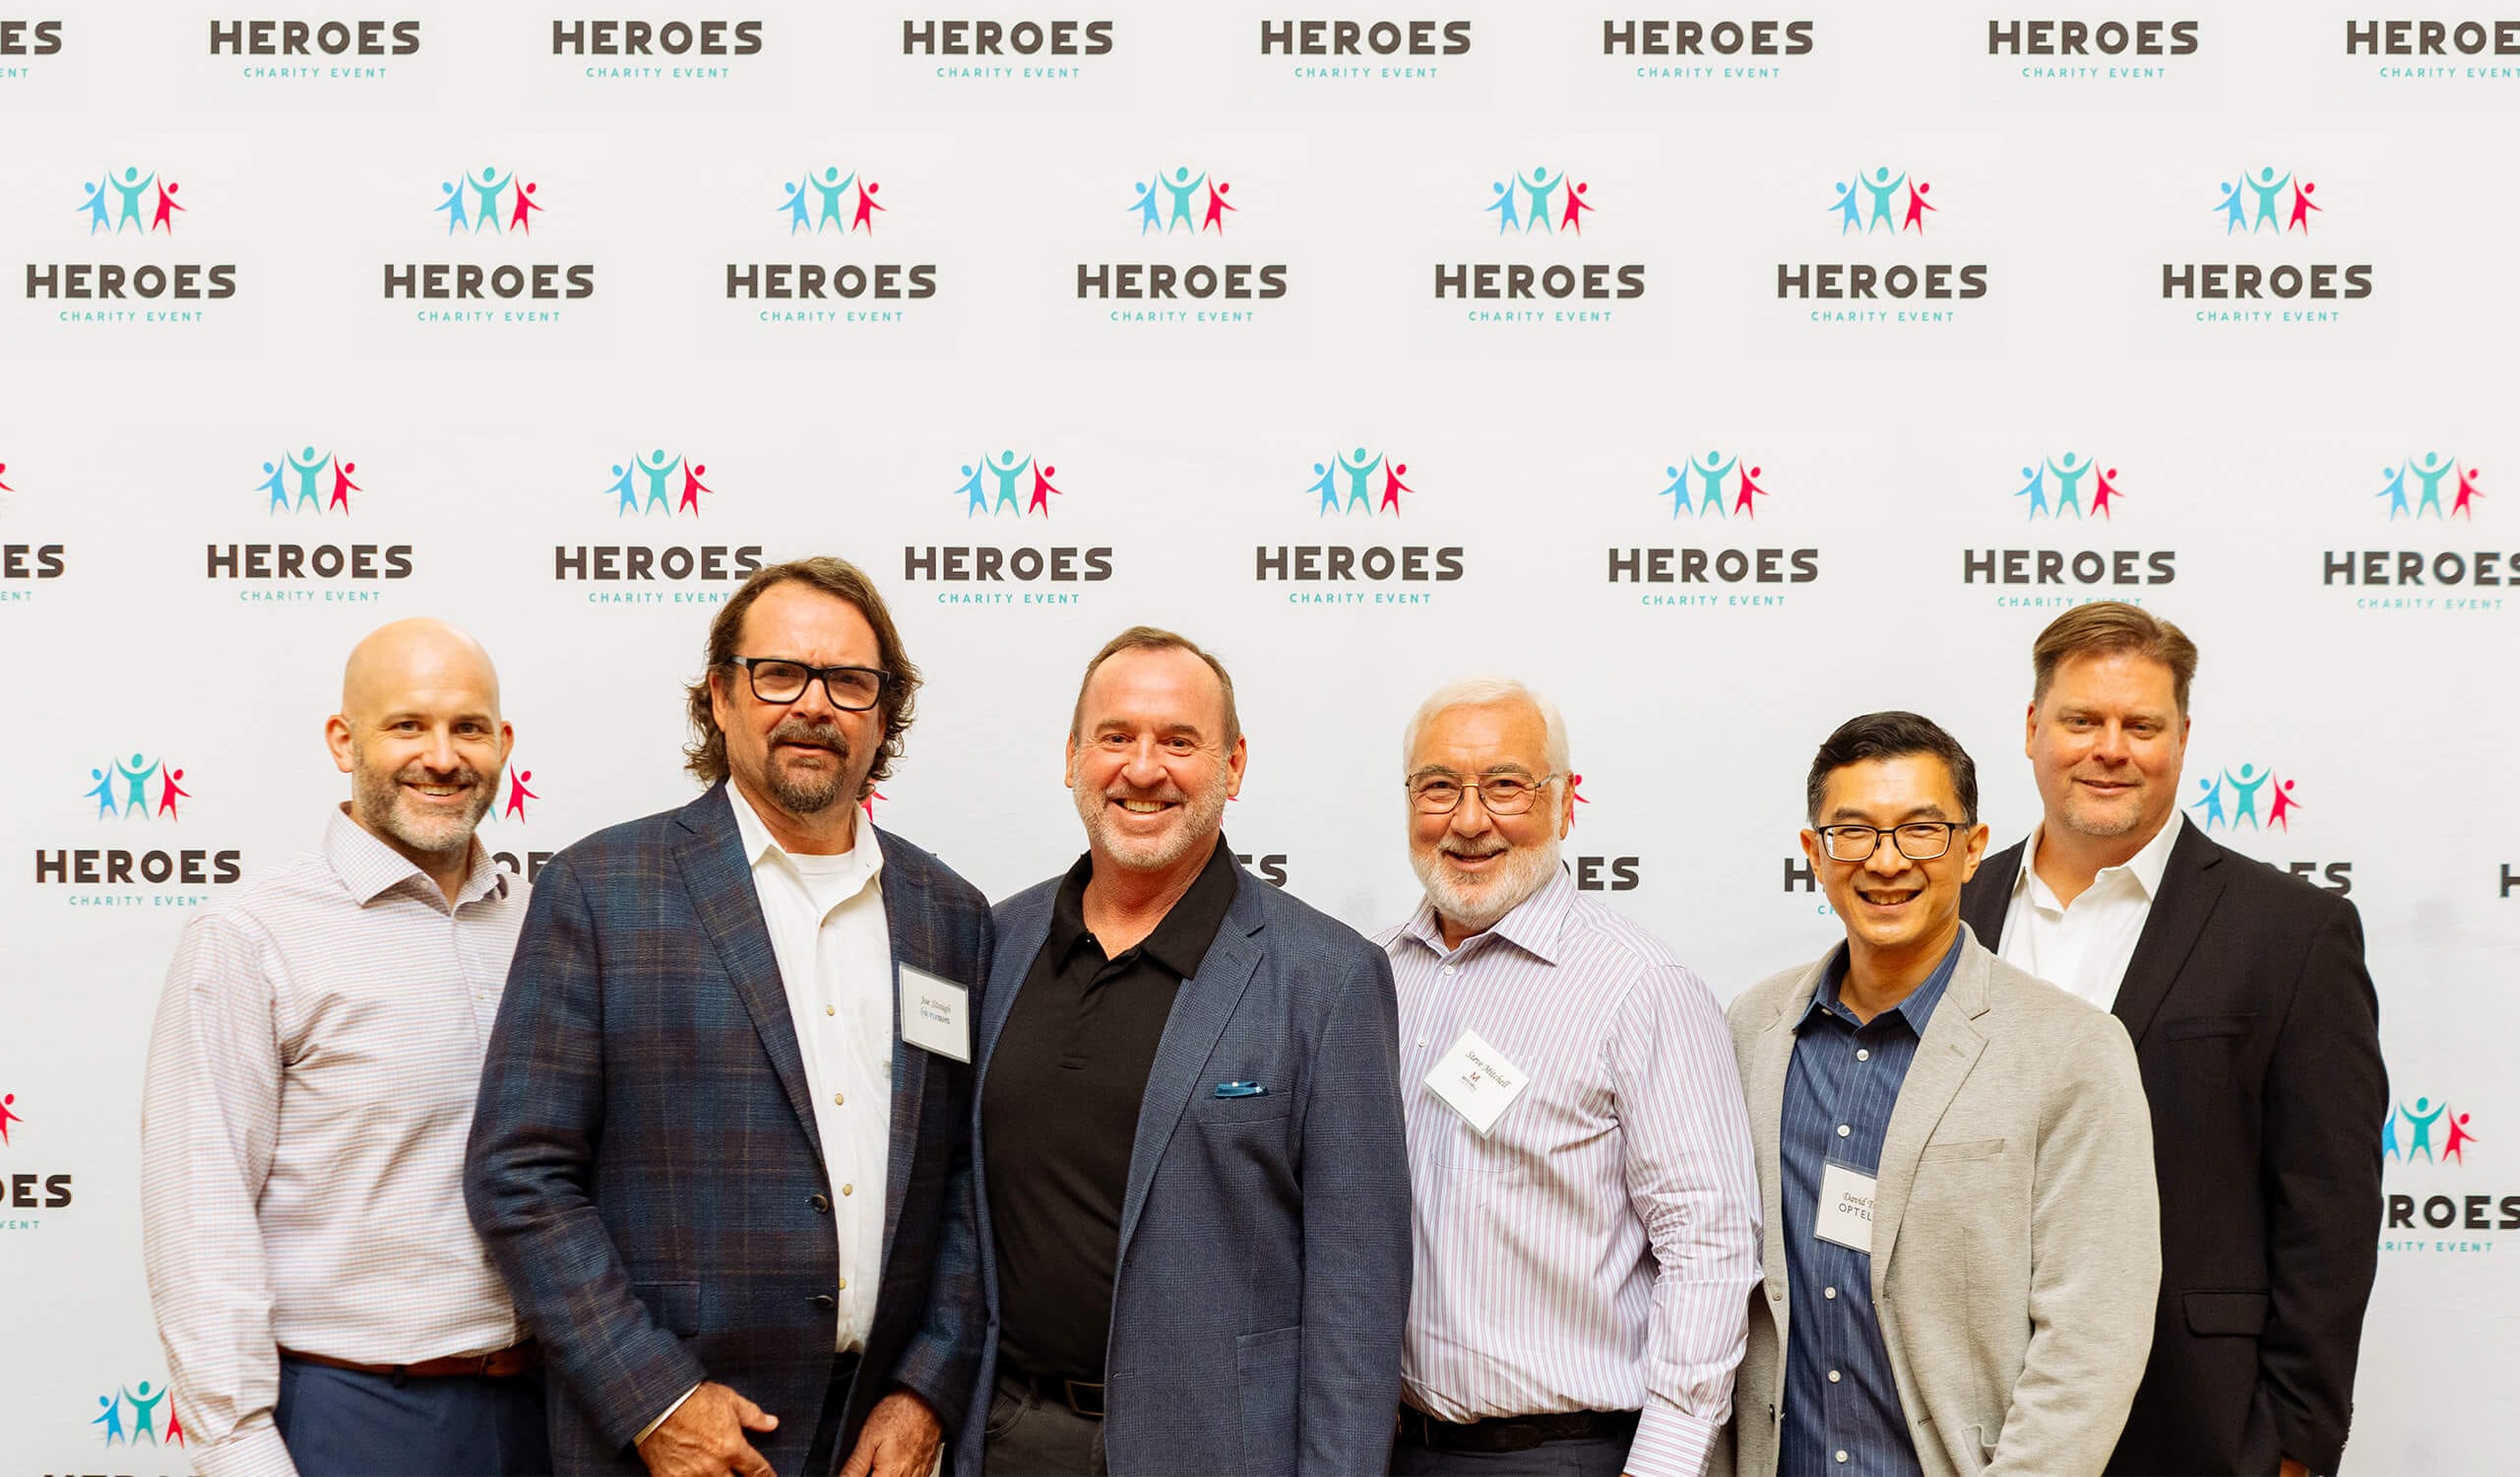 Heroes Charity Foundation Event Raises Largest Amount  In Its History Thanks to New Sponsors